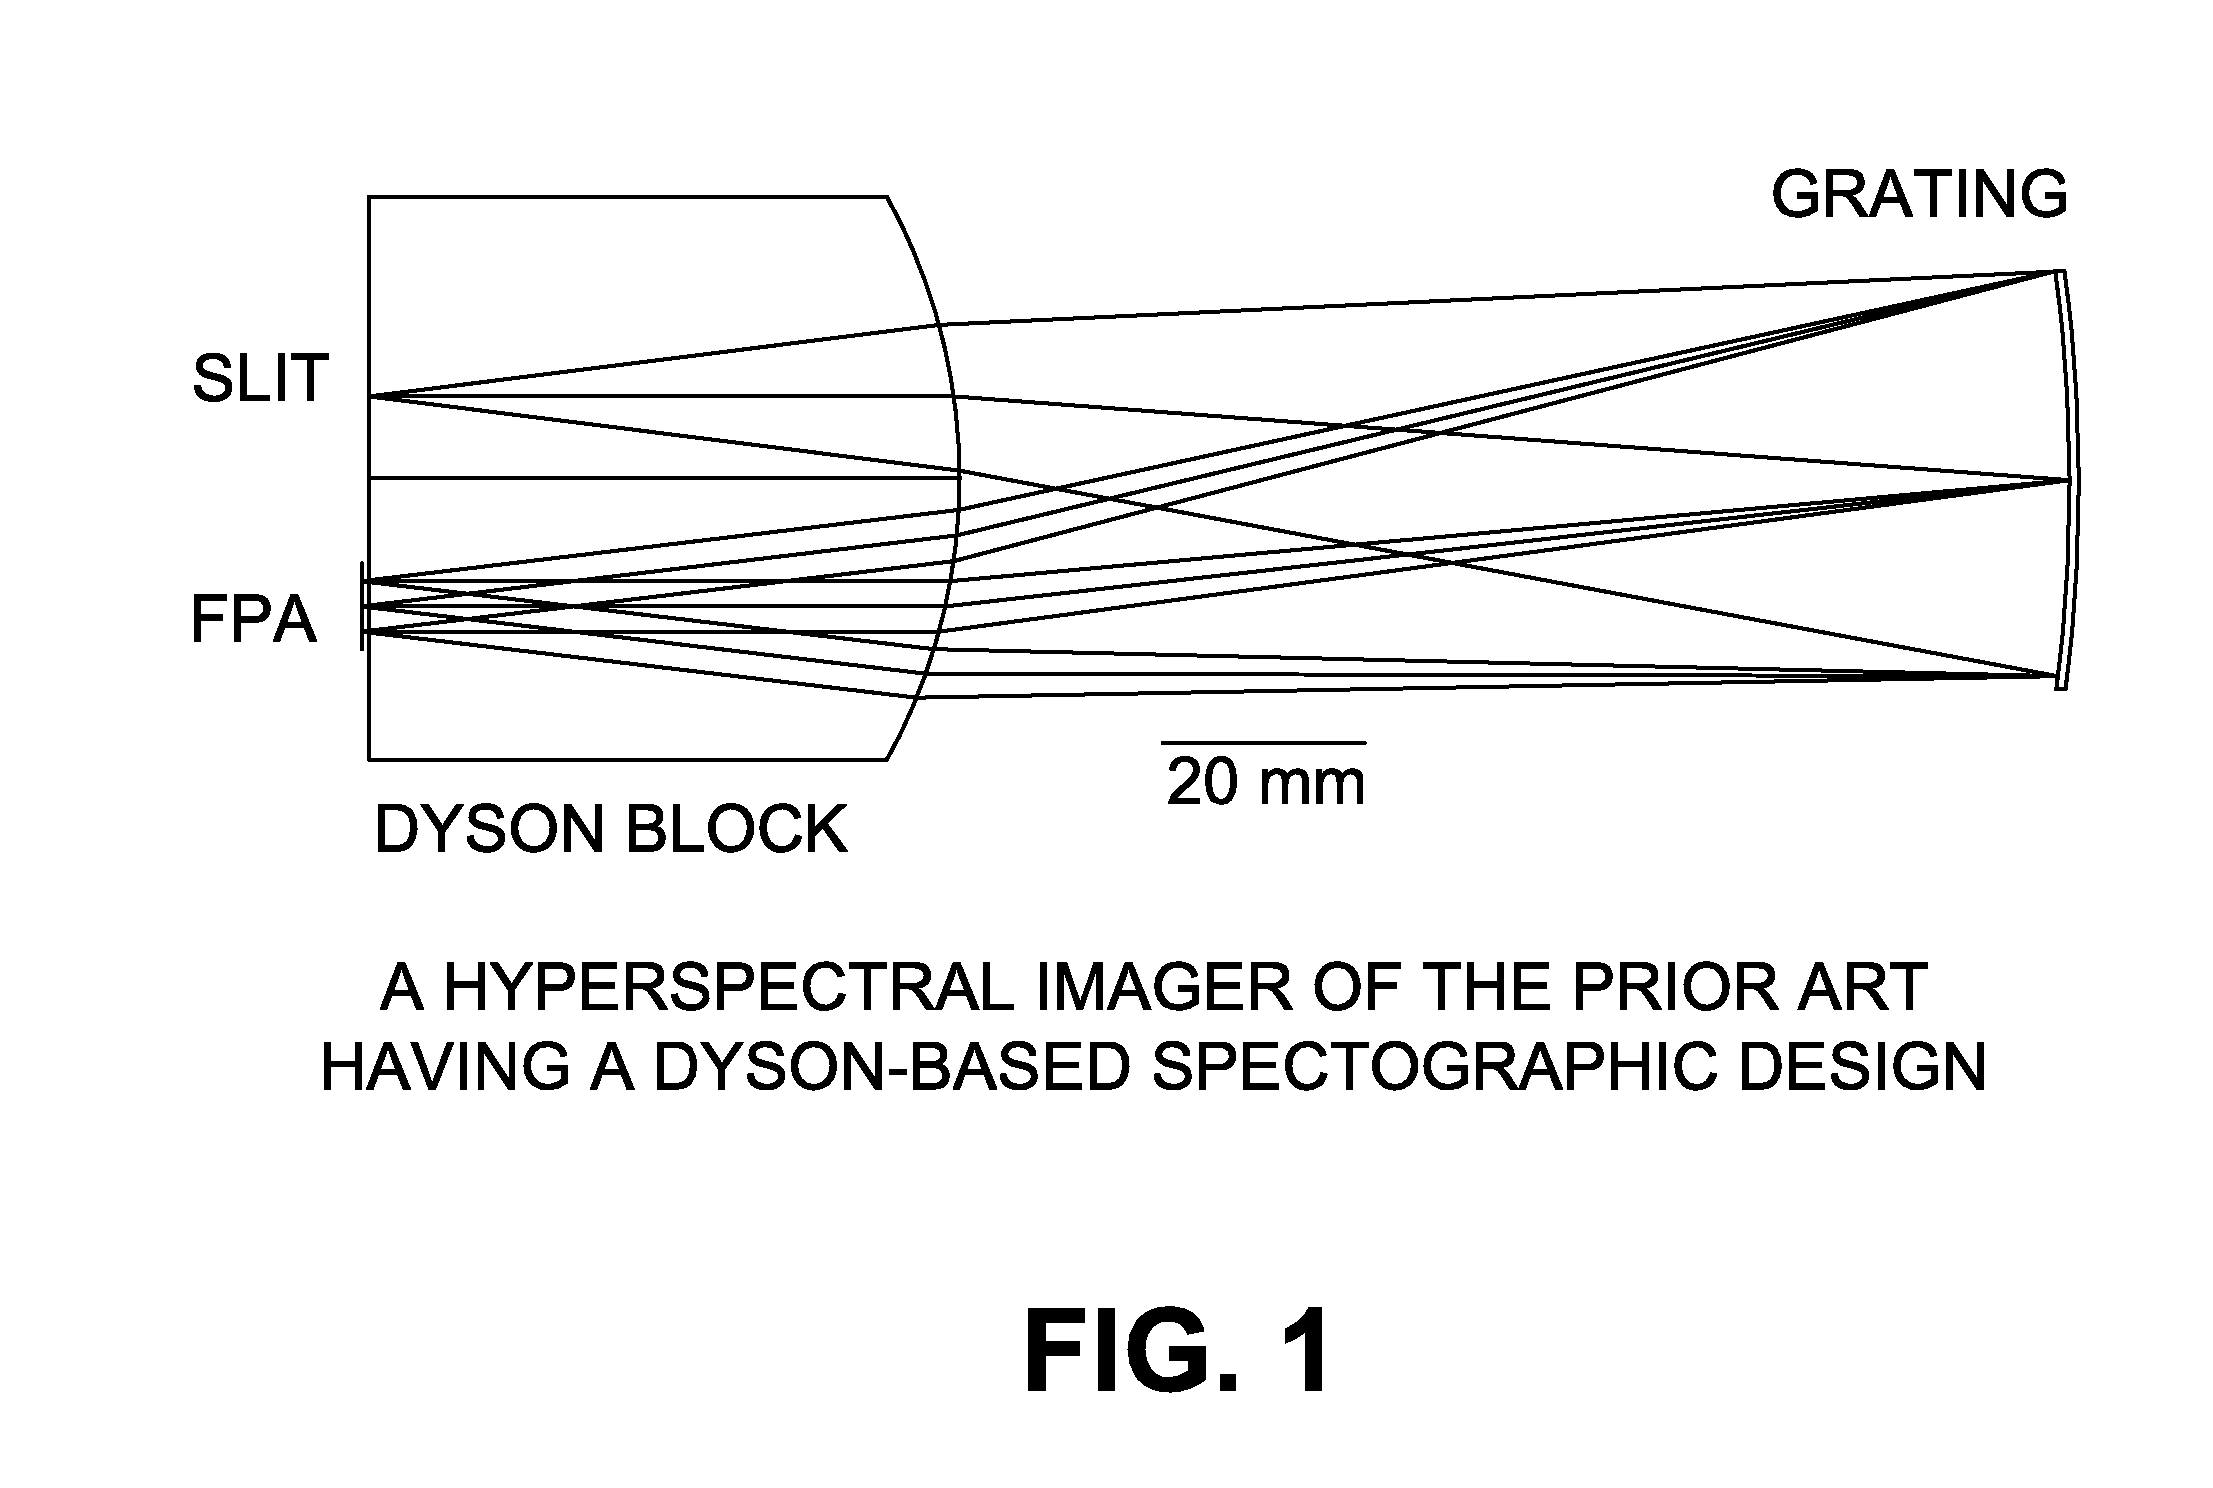 Compact, light-transfer system for use in image relay devices, hyperspectral imagers and spectographs